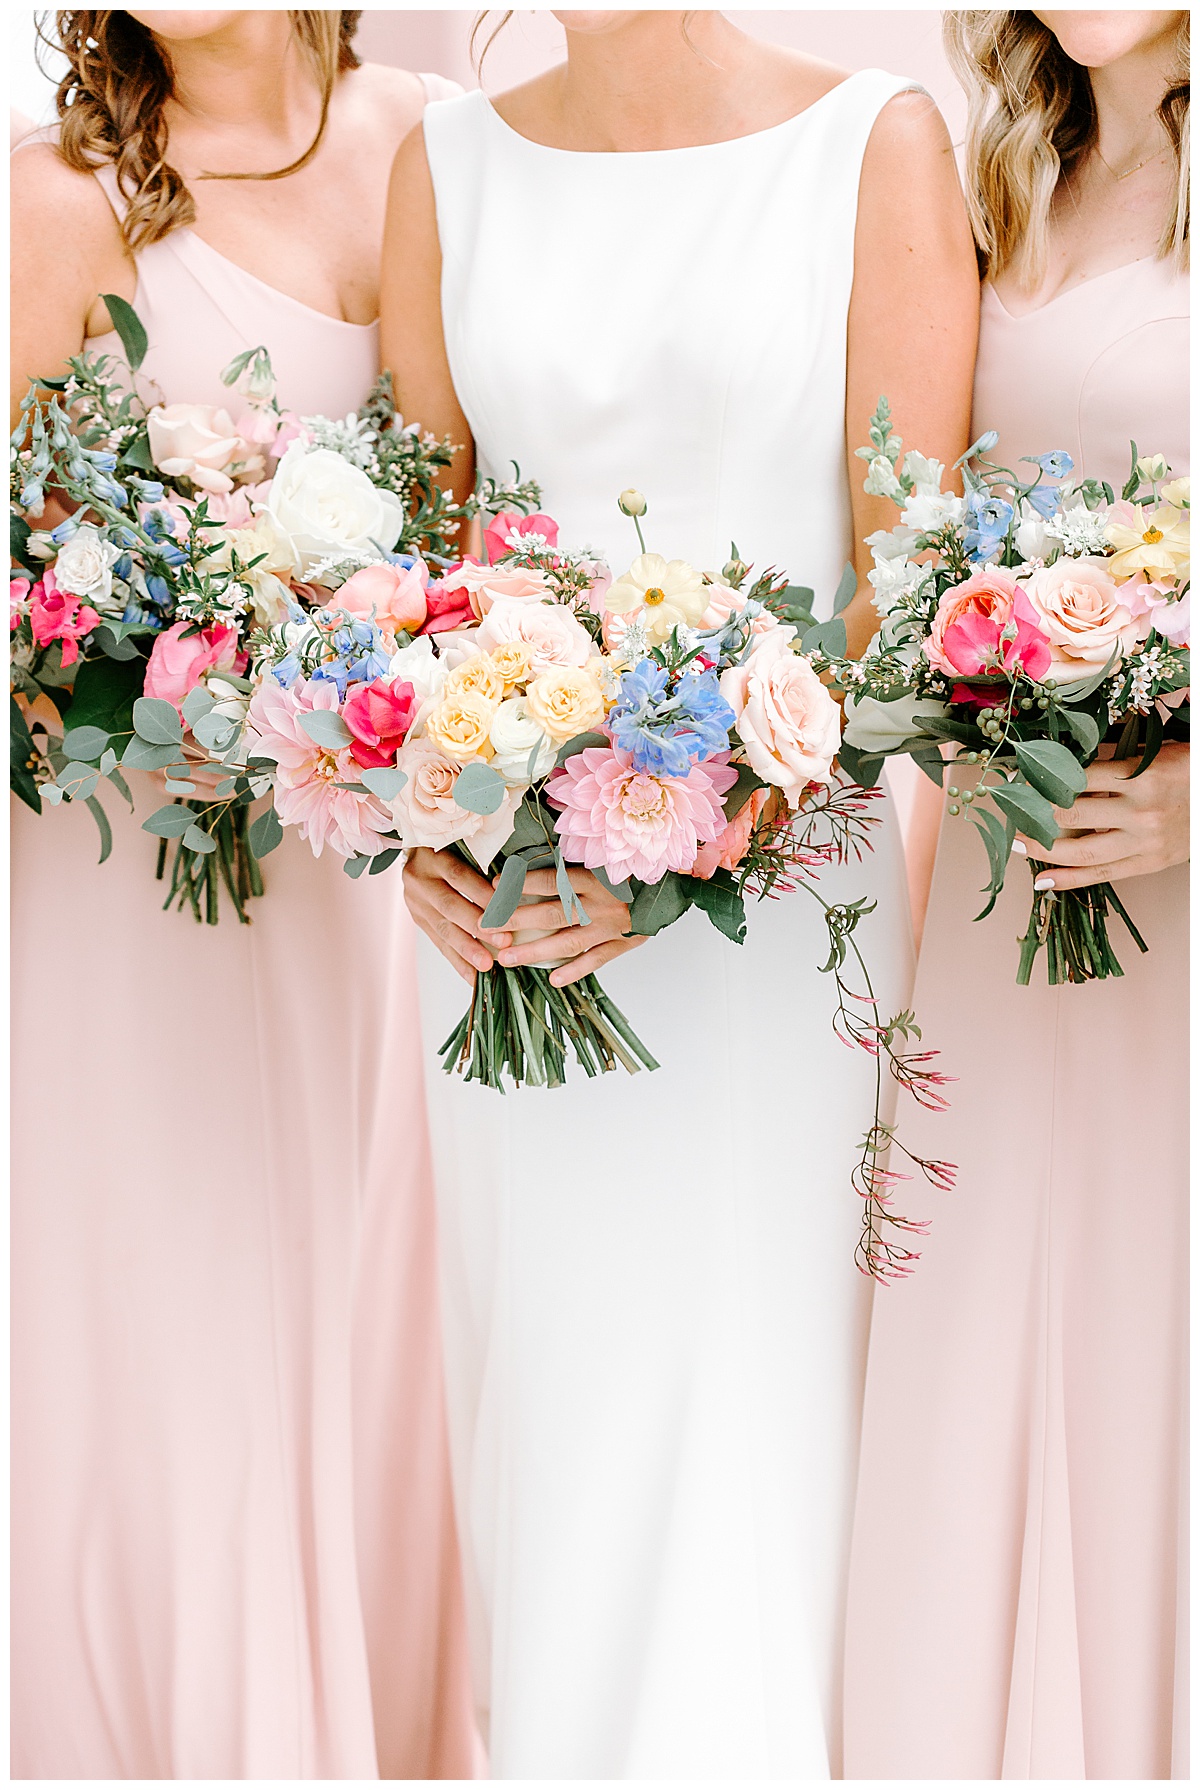 bride and bridesmaids holding flowers